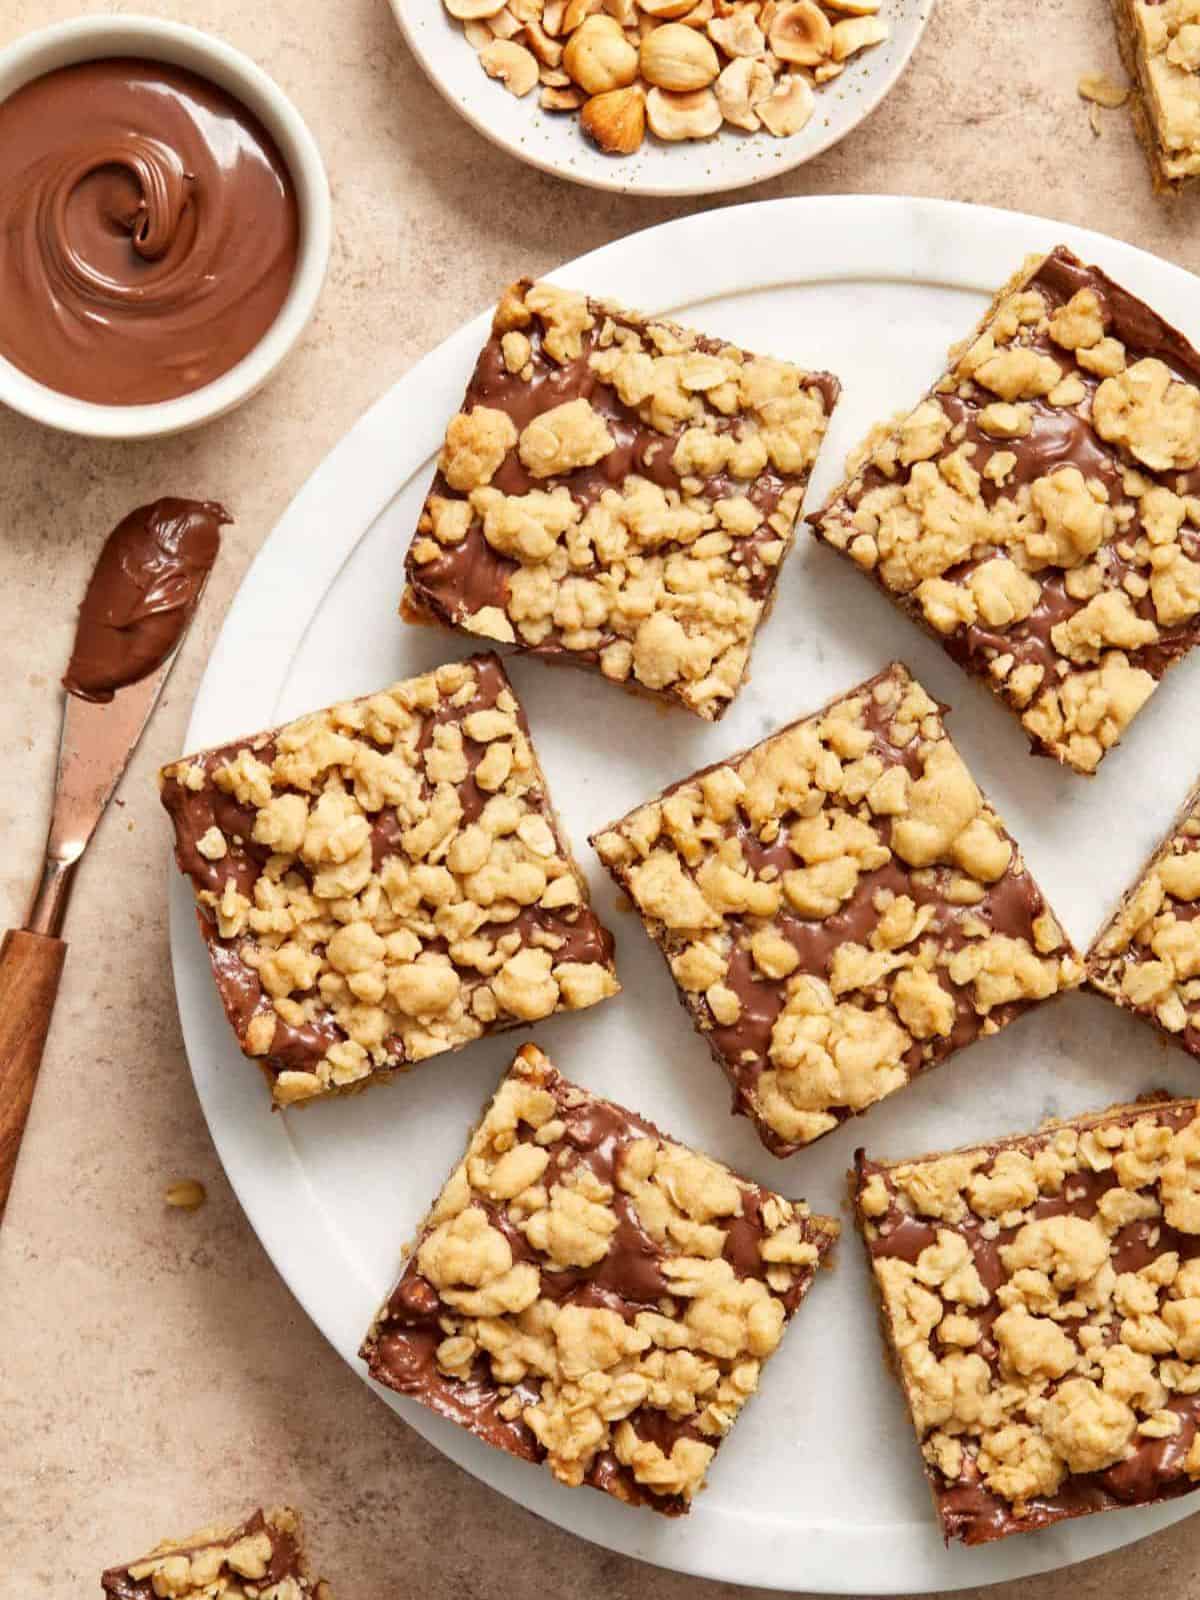 Nutella oatmeal bars featuring a crisp base, Nutella center, and a crispy crumble topping.